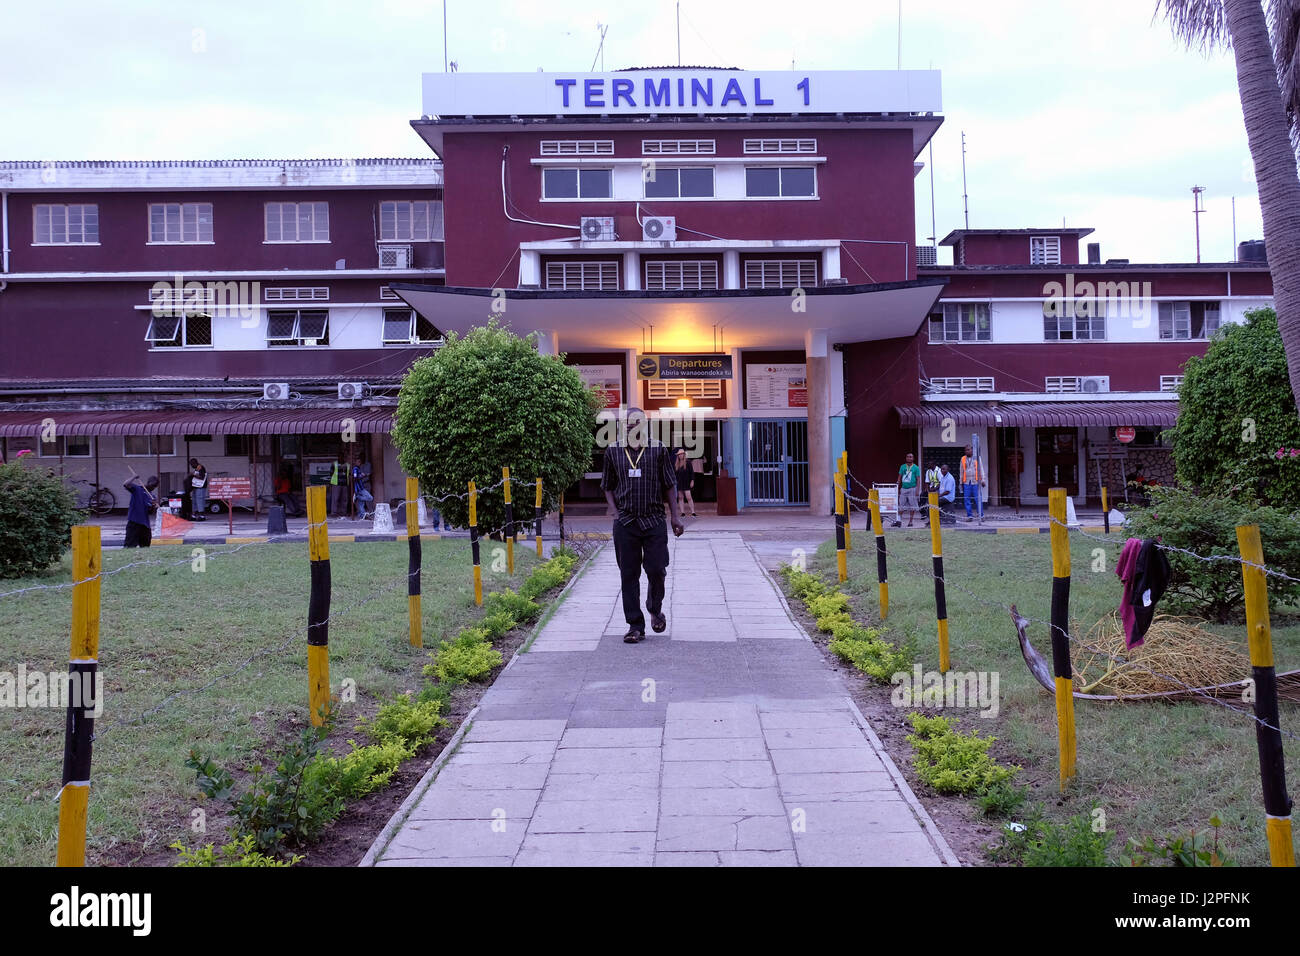 Exterior of terminal 1 building at the Julius nyerere airport in Dar es Salaam, the largest city of Tanzania in eastern Africa Stock Photo